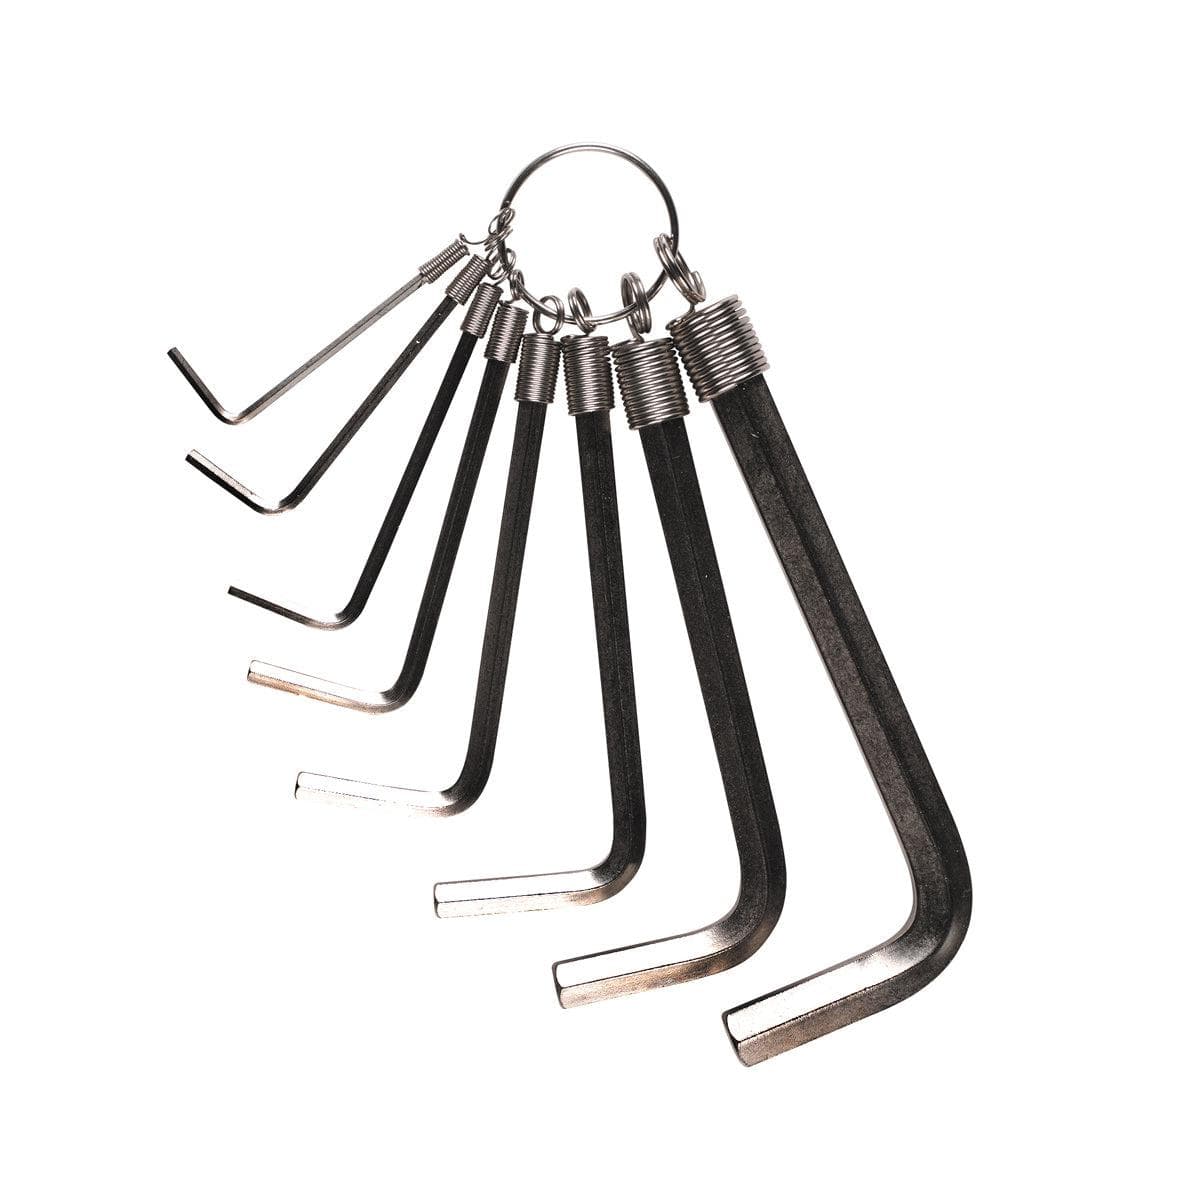 Cyclo Hex. Key Ring Wrench Set (8):